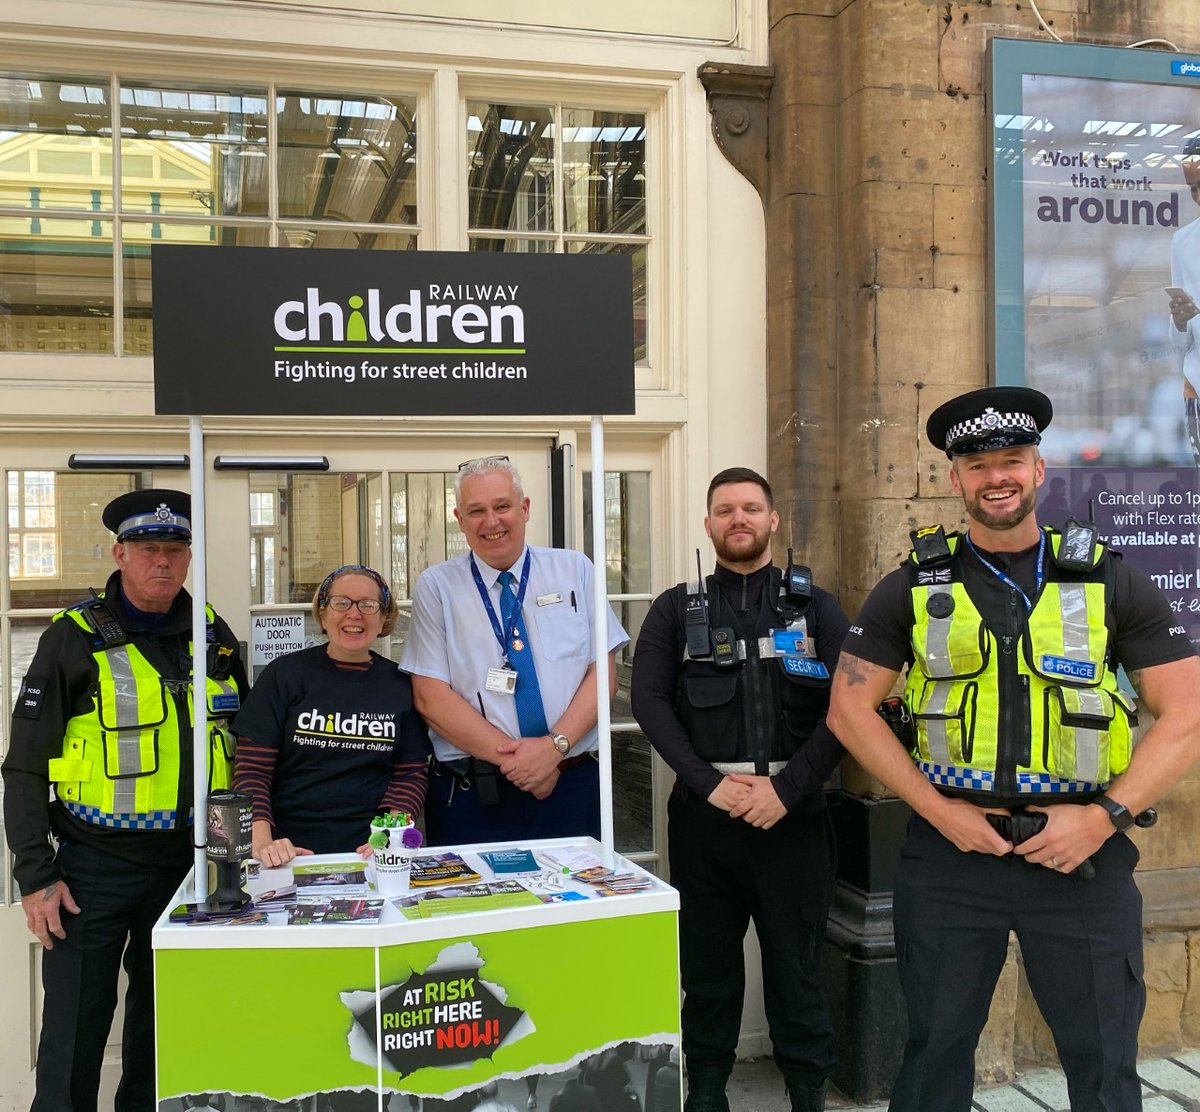 It was good to reach out to a high level footfall this morning with a morning engagement event at Hull.  We have been working in conjunction with the Railway Children and TPE around safeguarding and promotion of the text 61016 number #Railwaychildren #TPE #Carlislesecurity